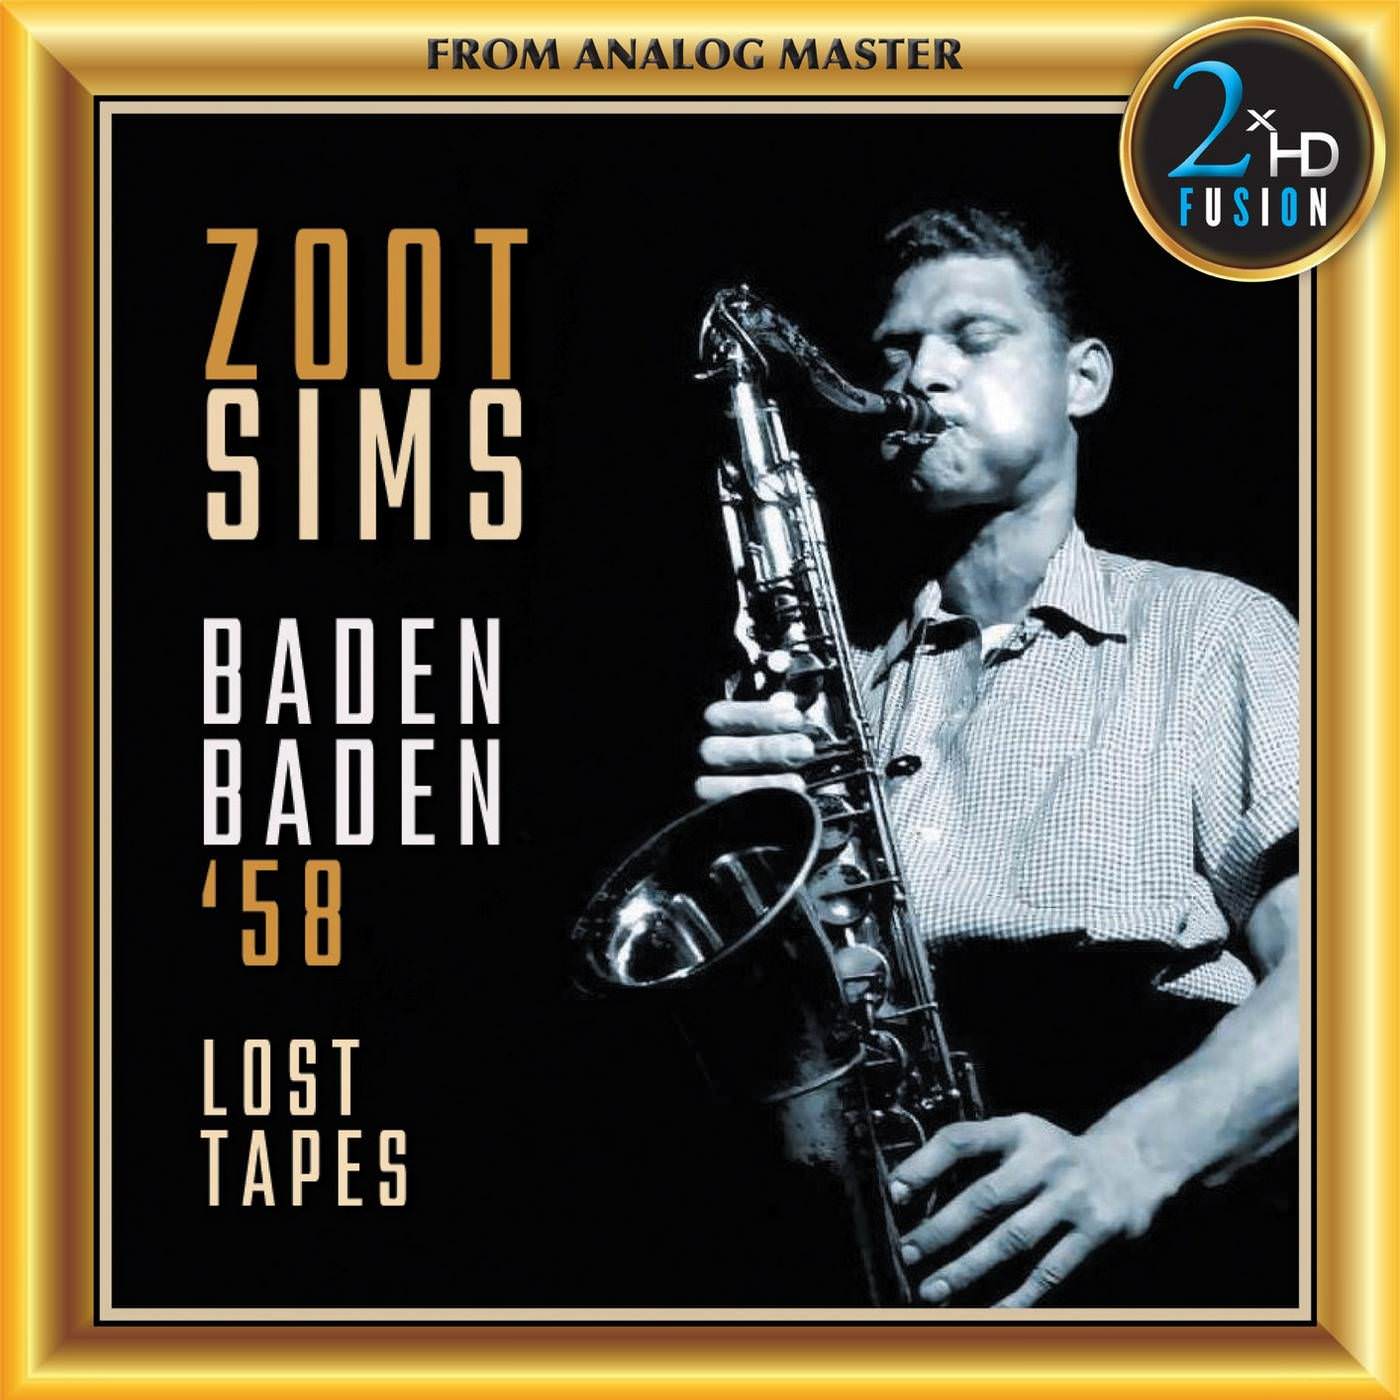 Zoot Sims - Baden Baden ’58 Lost Tapes (Remastered) (2018) [FLAC 24bit/192kHz]